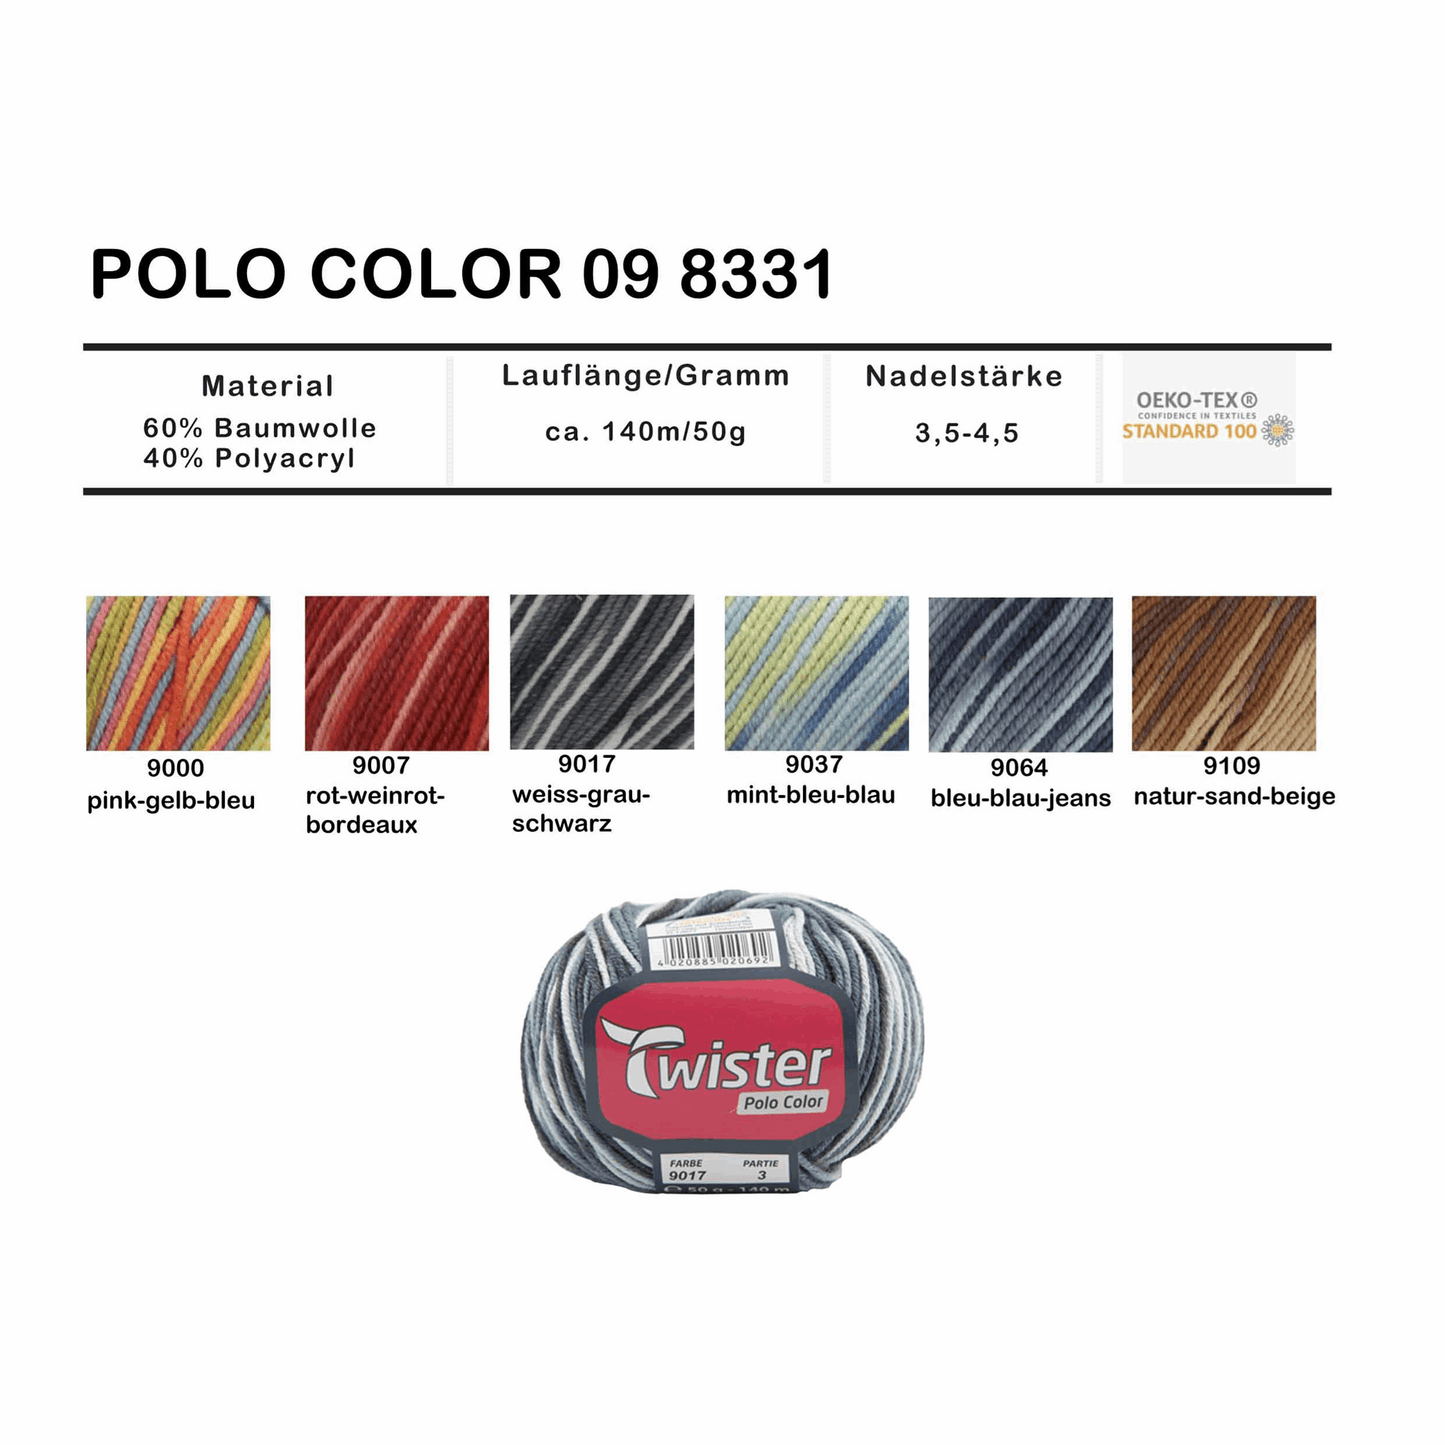 Twister Polo color, 50g, 98331, color nat/sand/at 9109